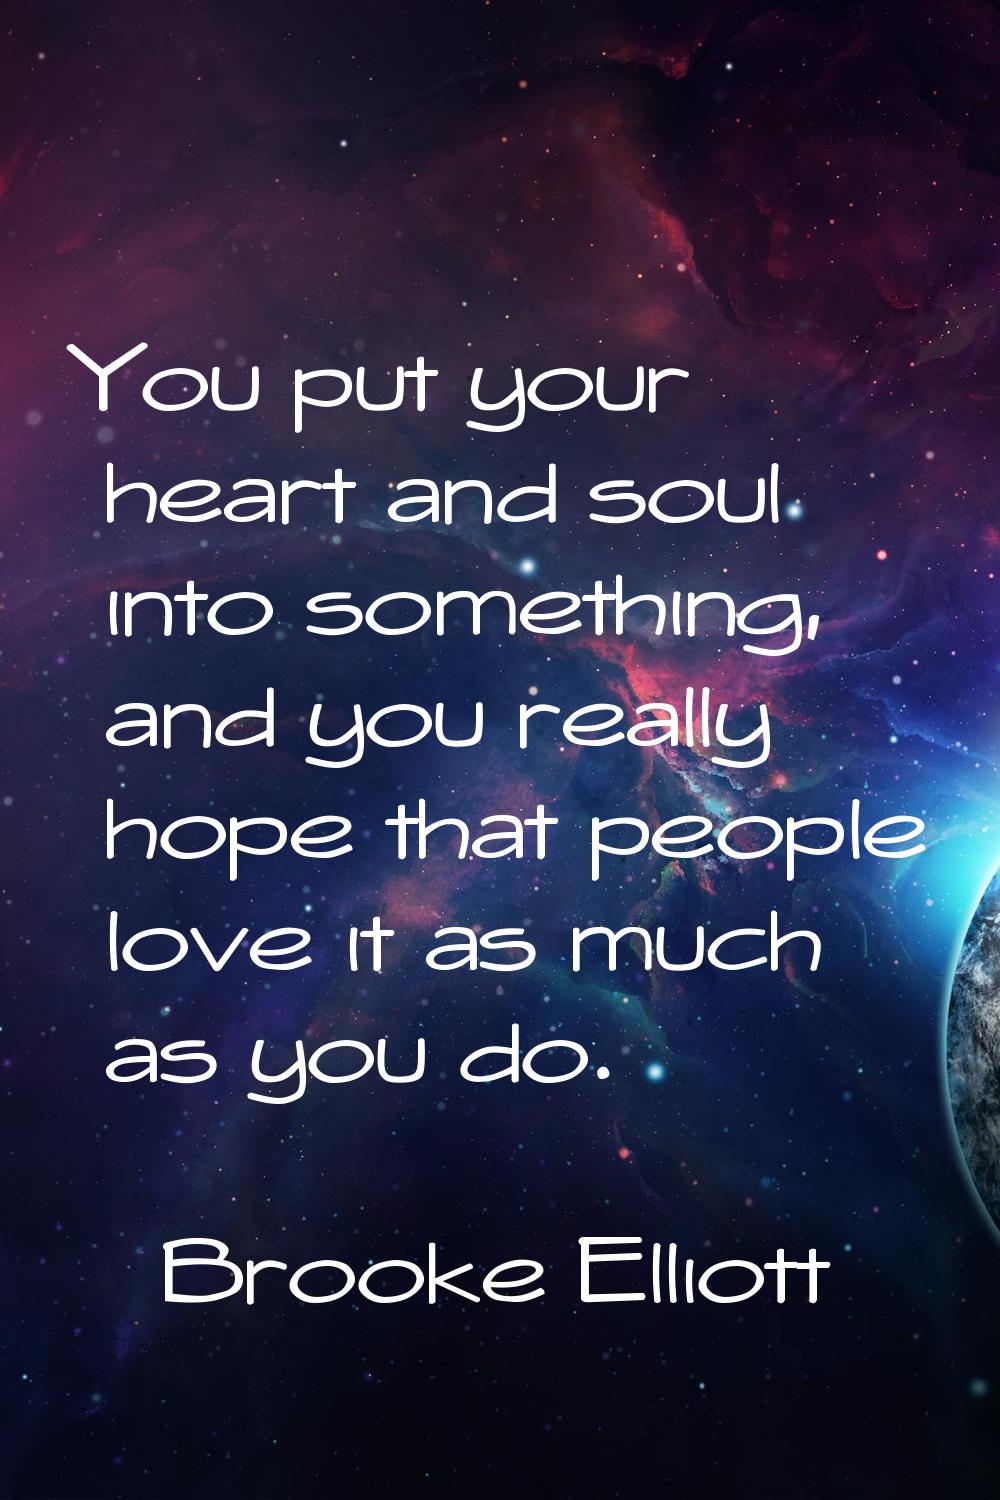 You put your heart and soul into something, and you really hope that people love it as much as you 